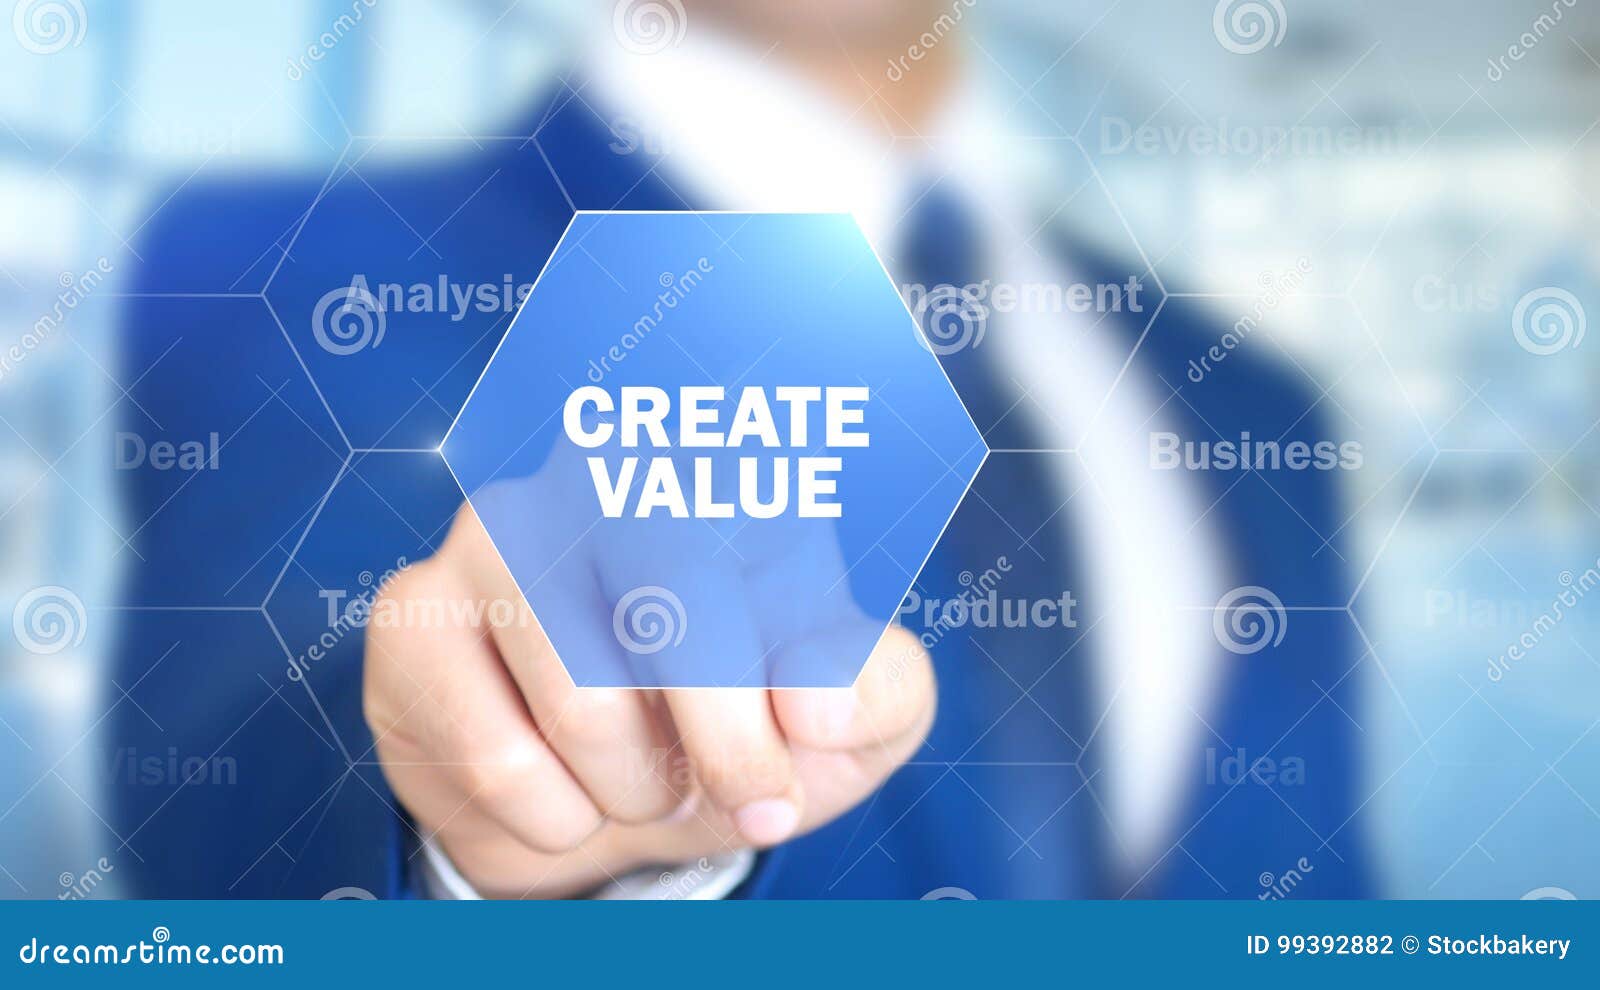 create value, businessman working on holographic interface, motion graphics